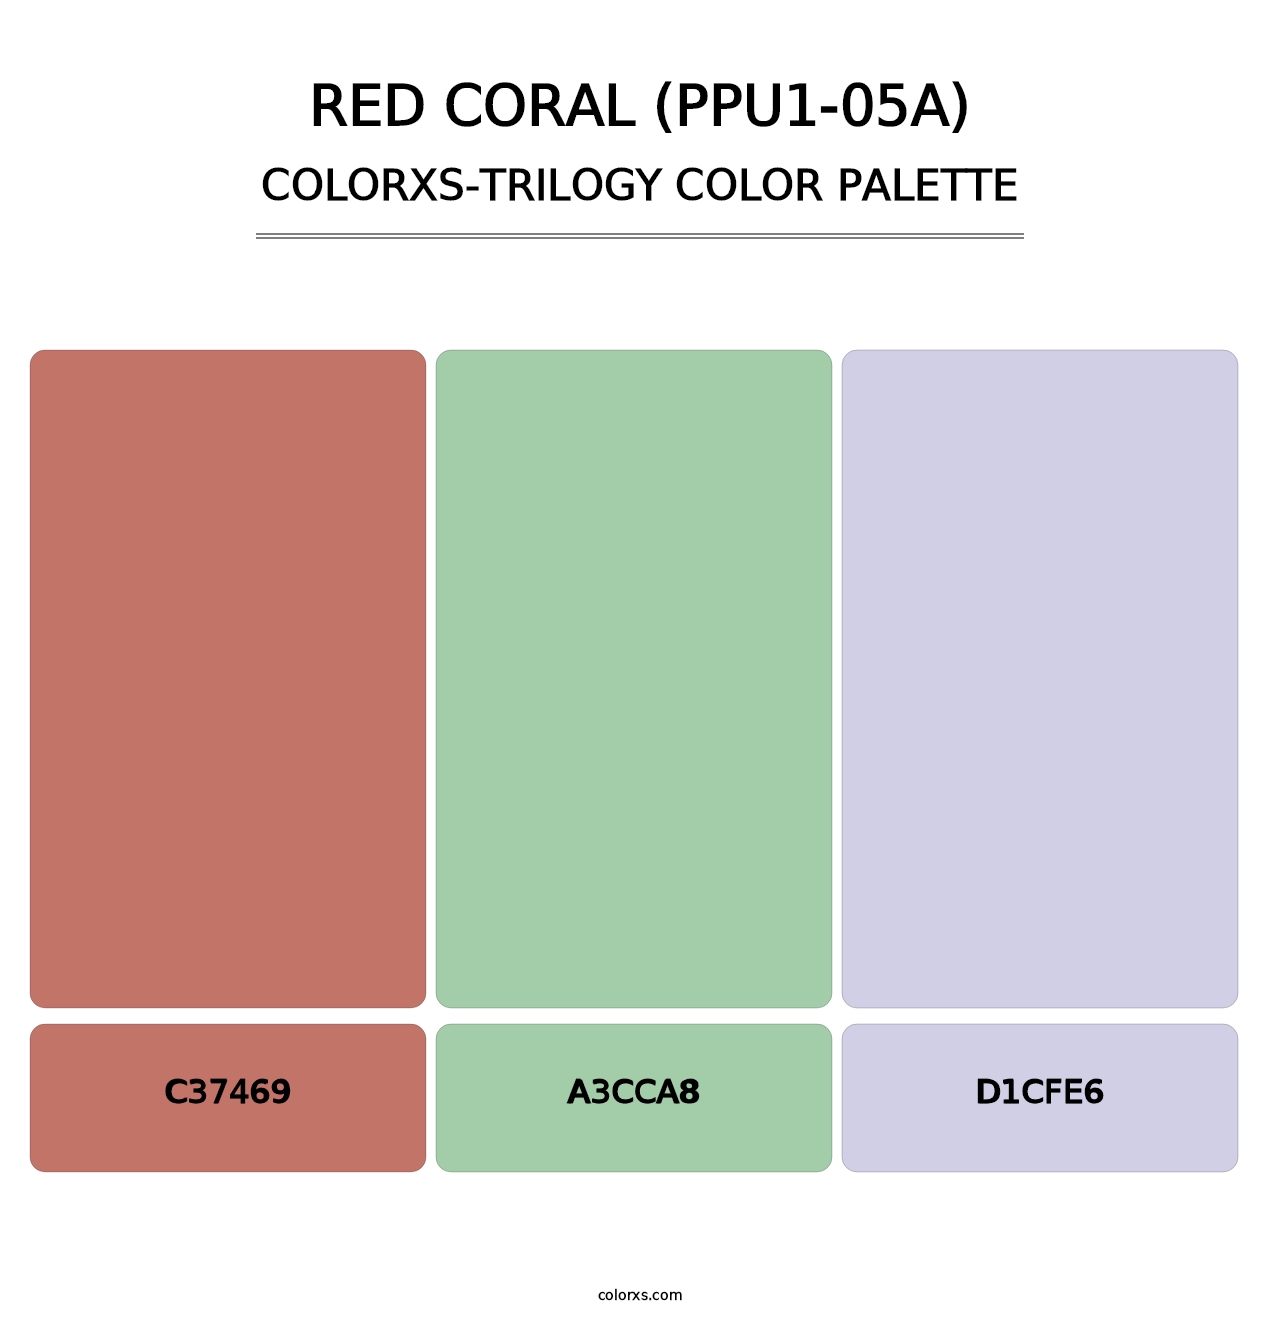 Red Coral (PPU1-05A) - Colorxs Trilogy Palette